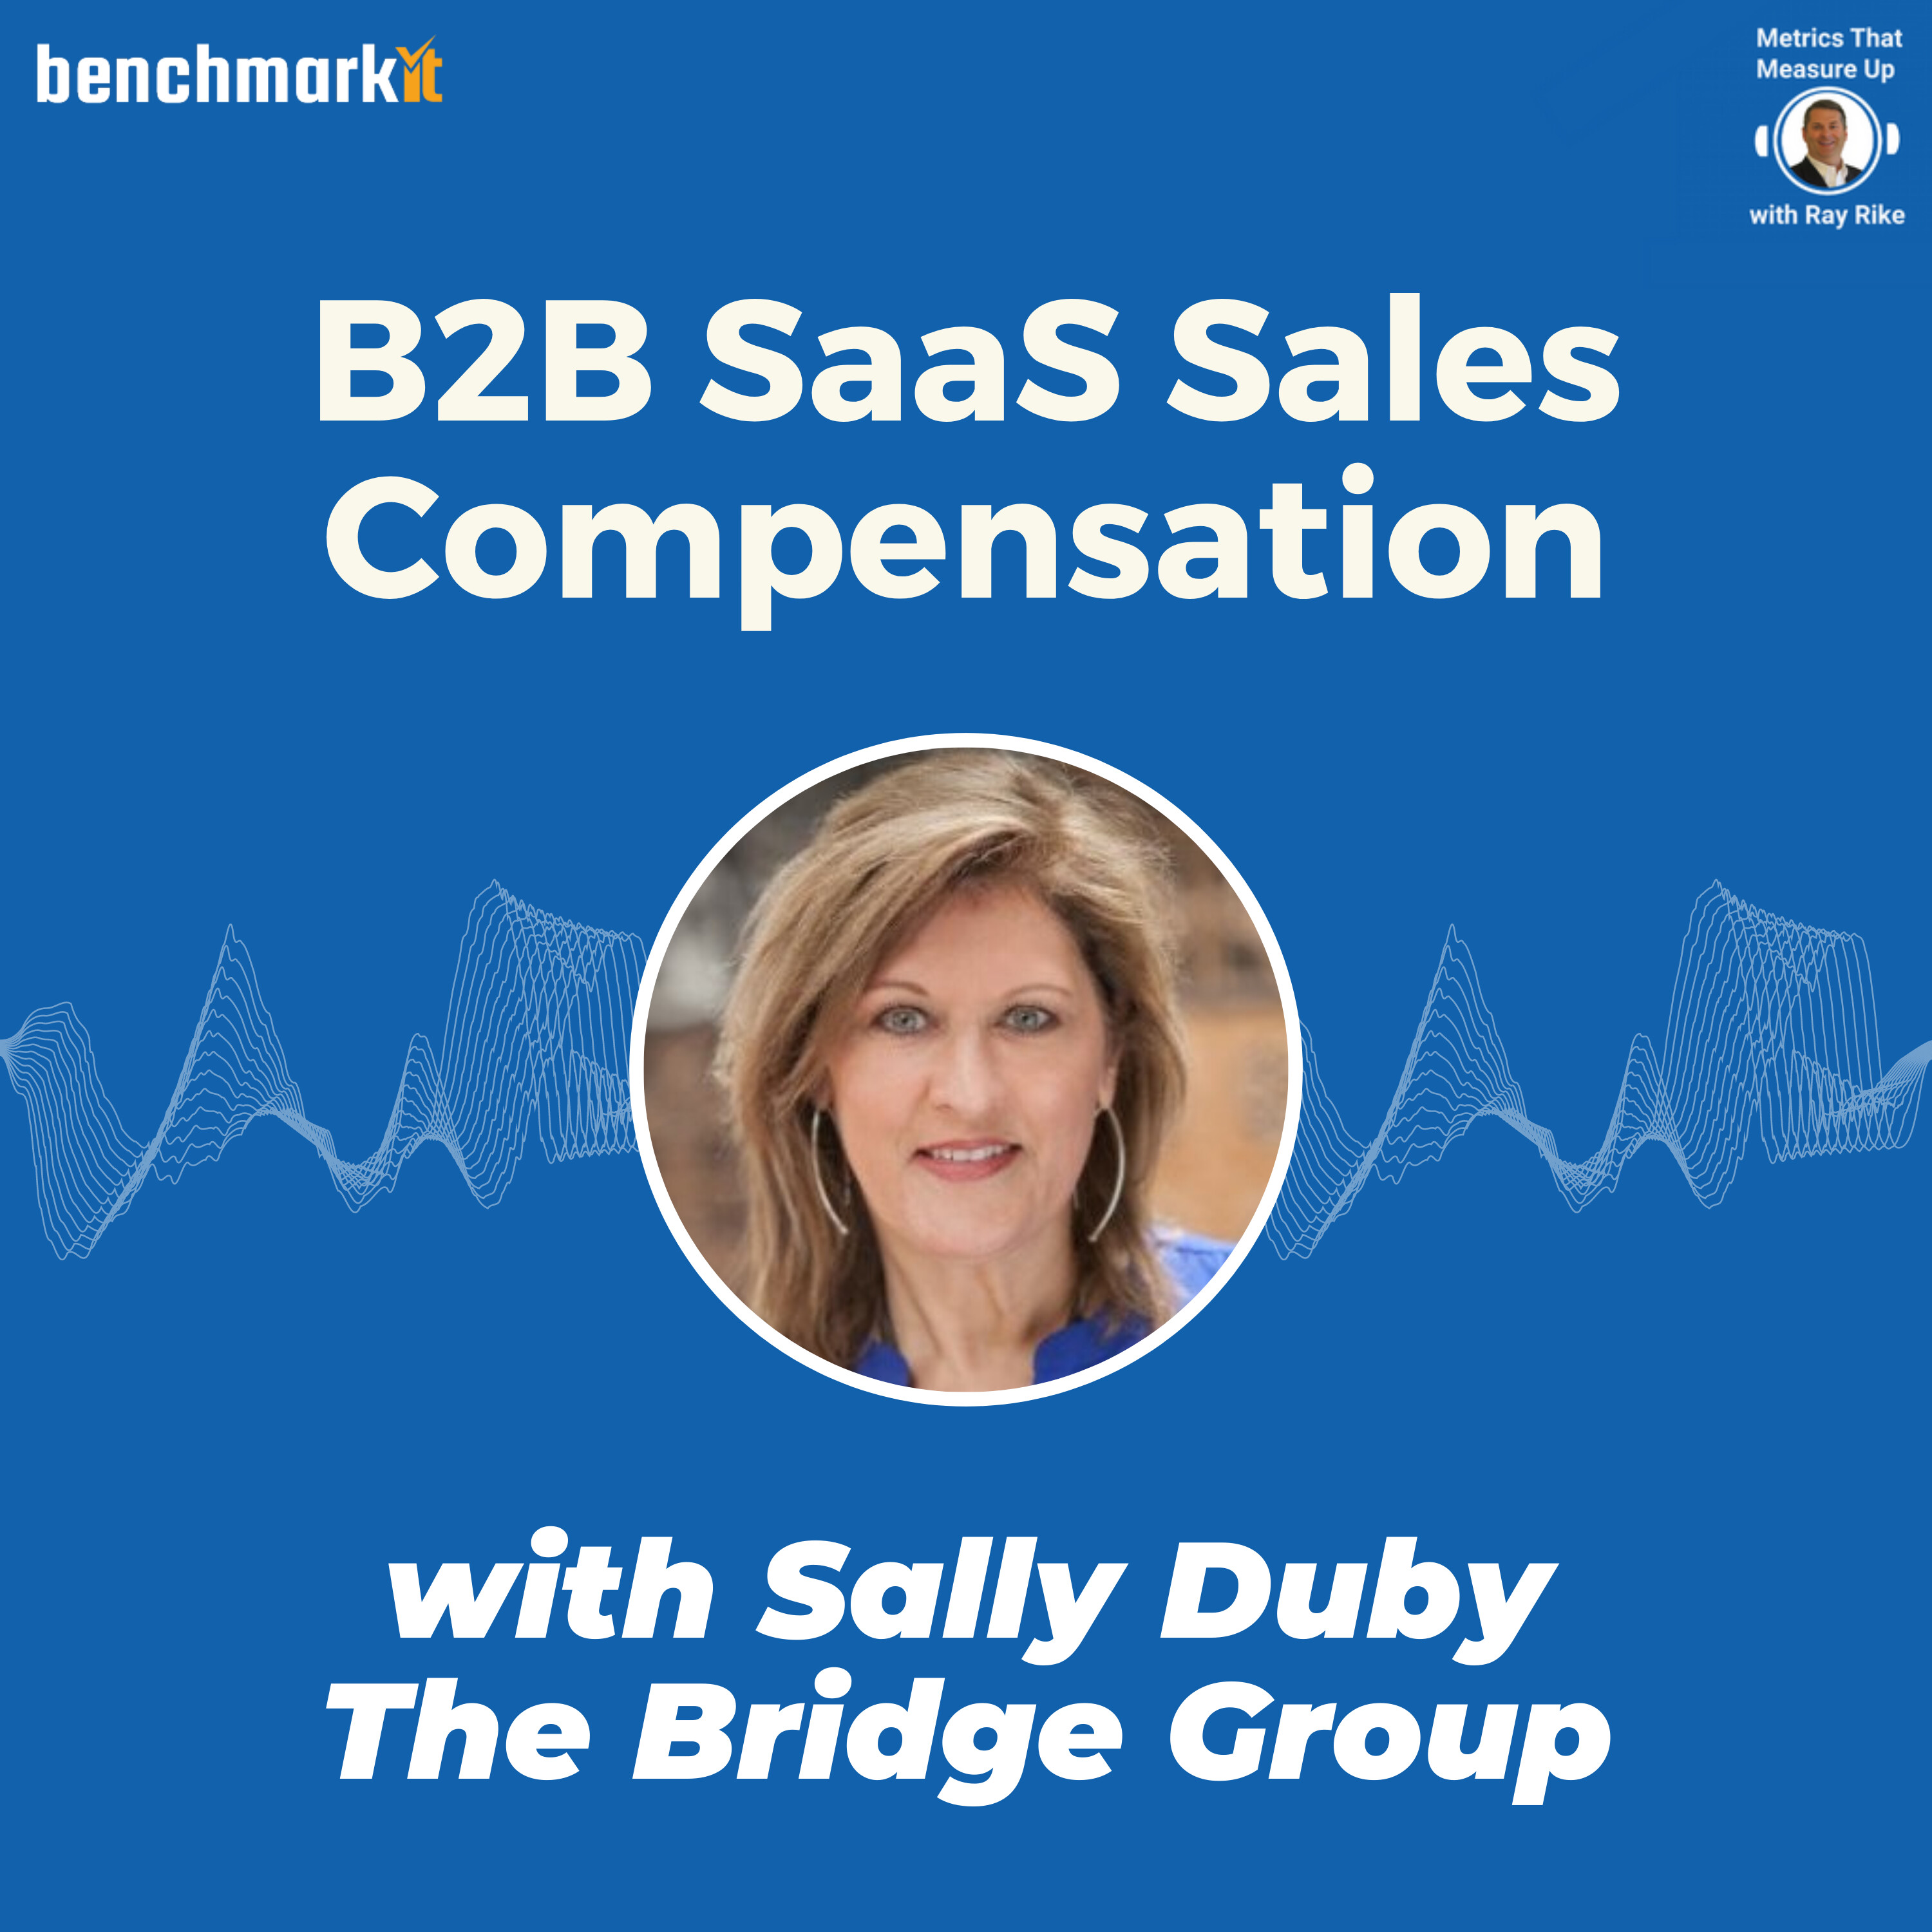 B2B SaaS Sales Compensation in 2020 - with Sally Duby - The Bridge Group